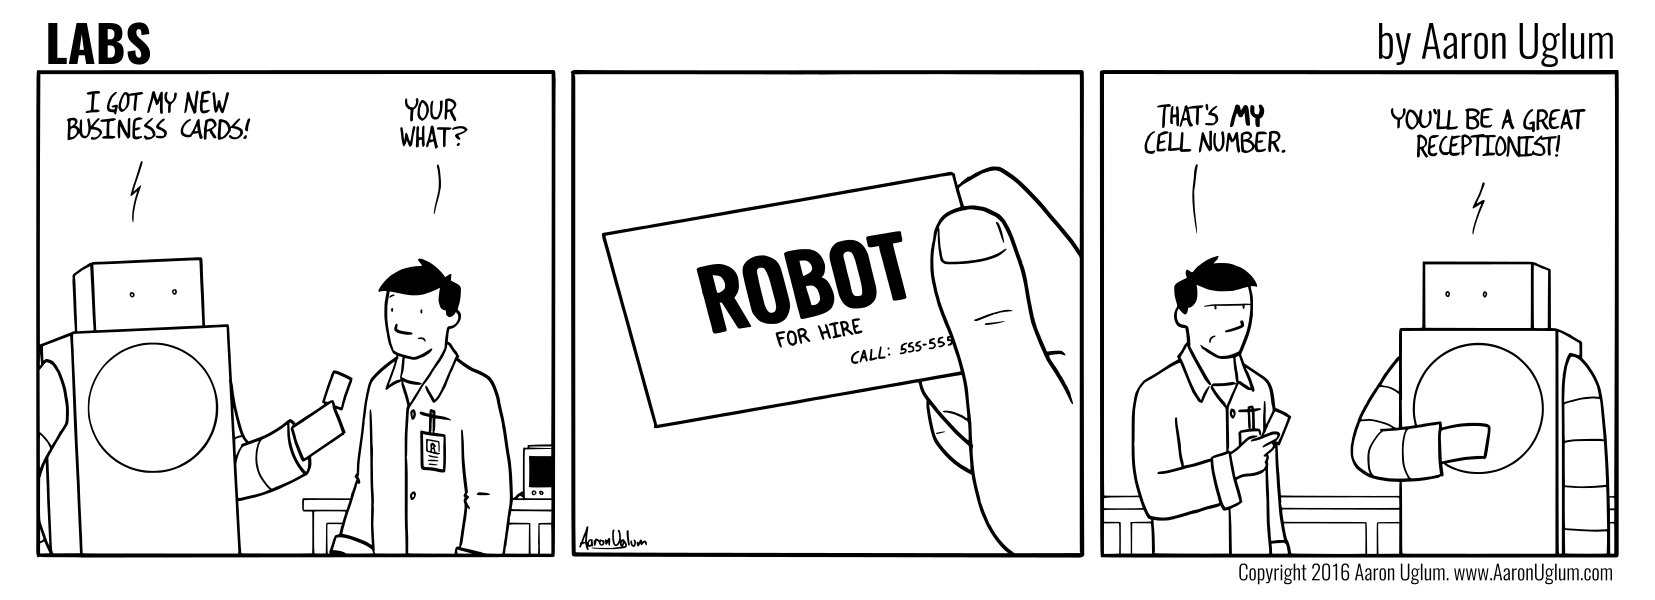 LABS 09/10/16 - The Robot's Business Cards